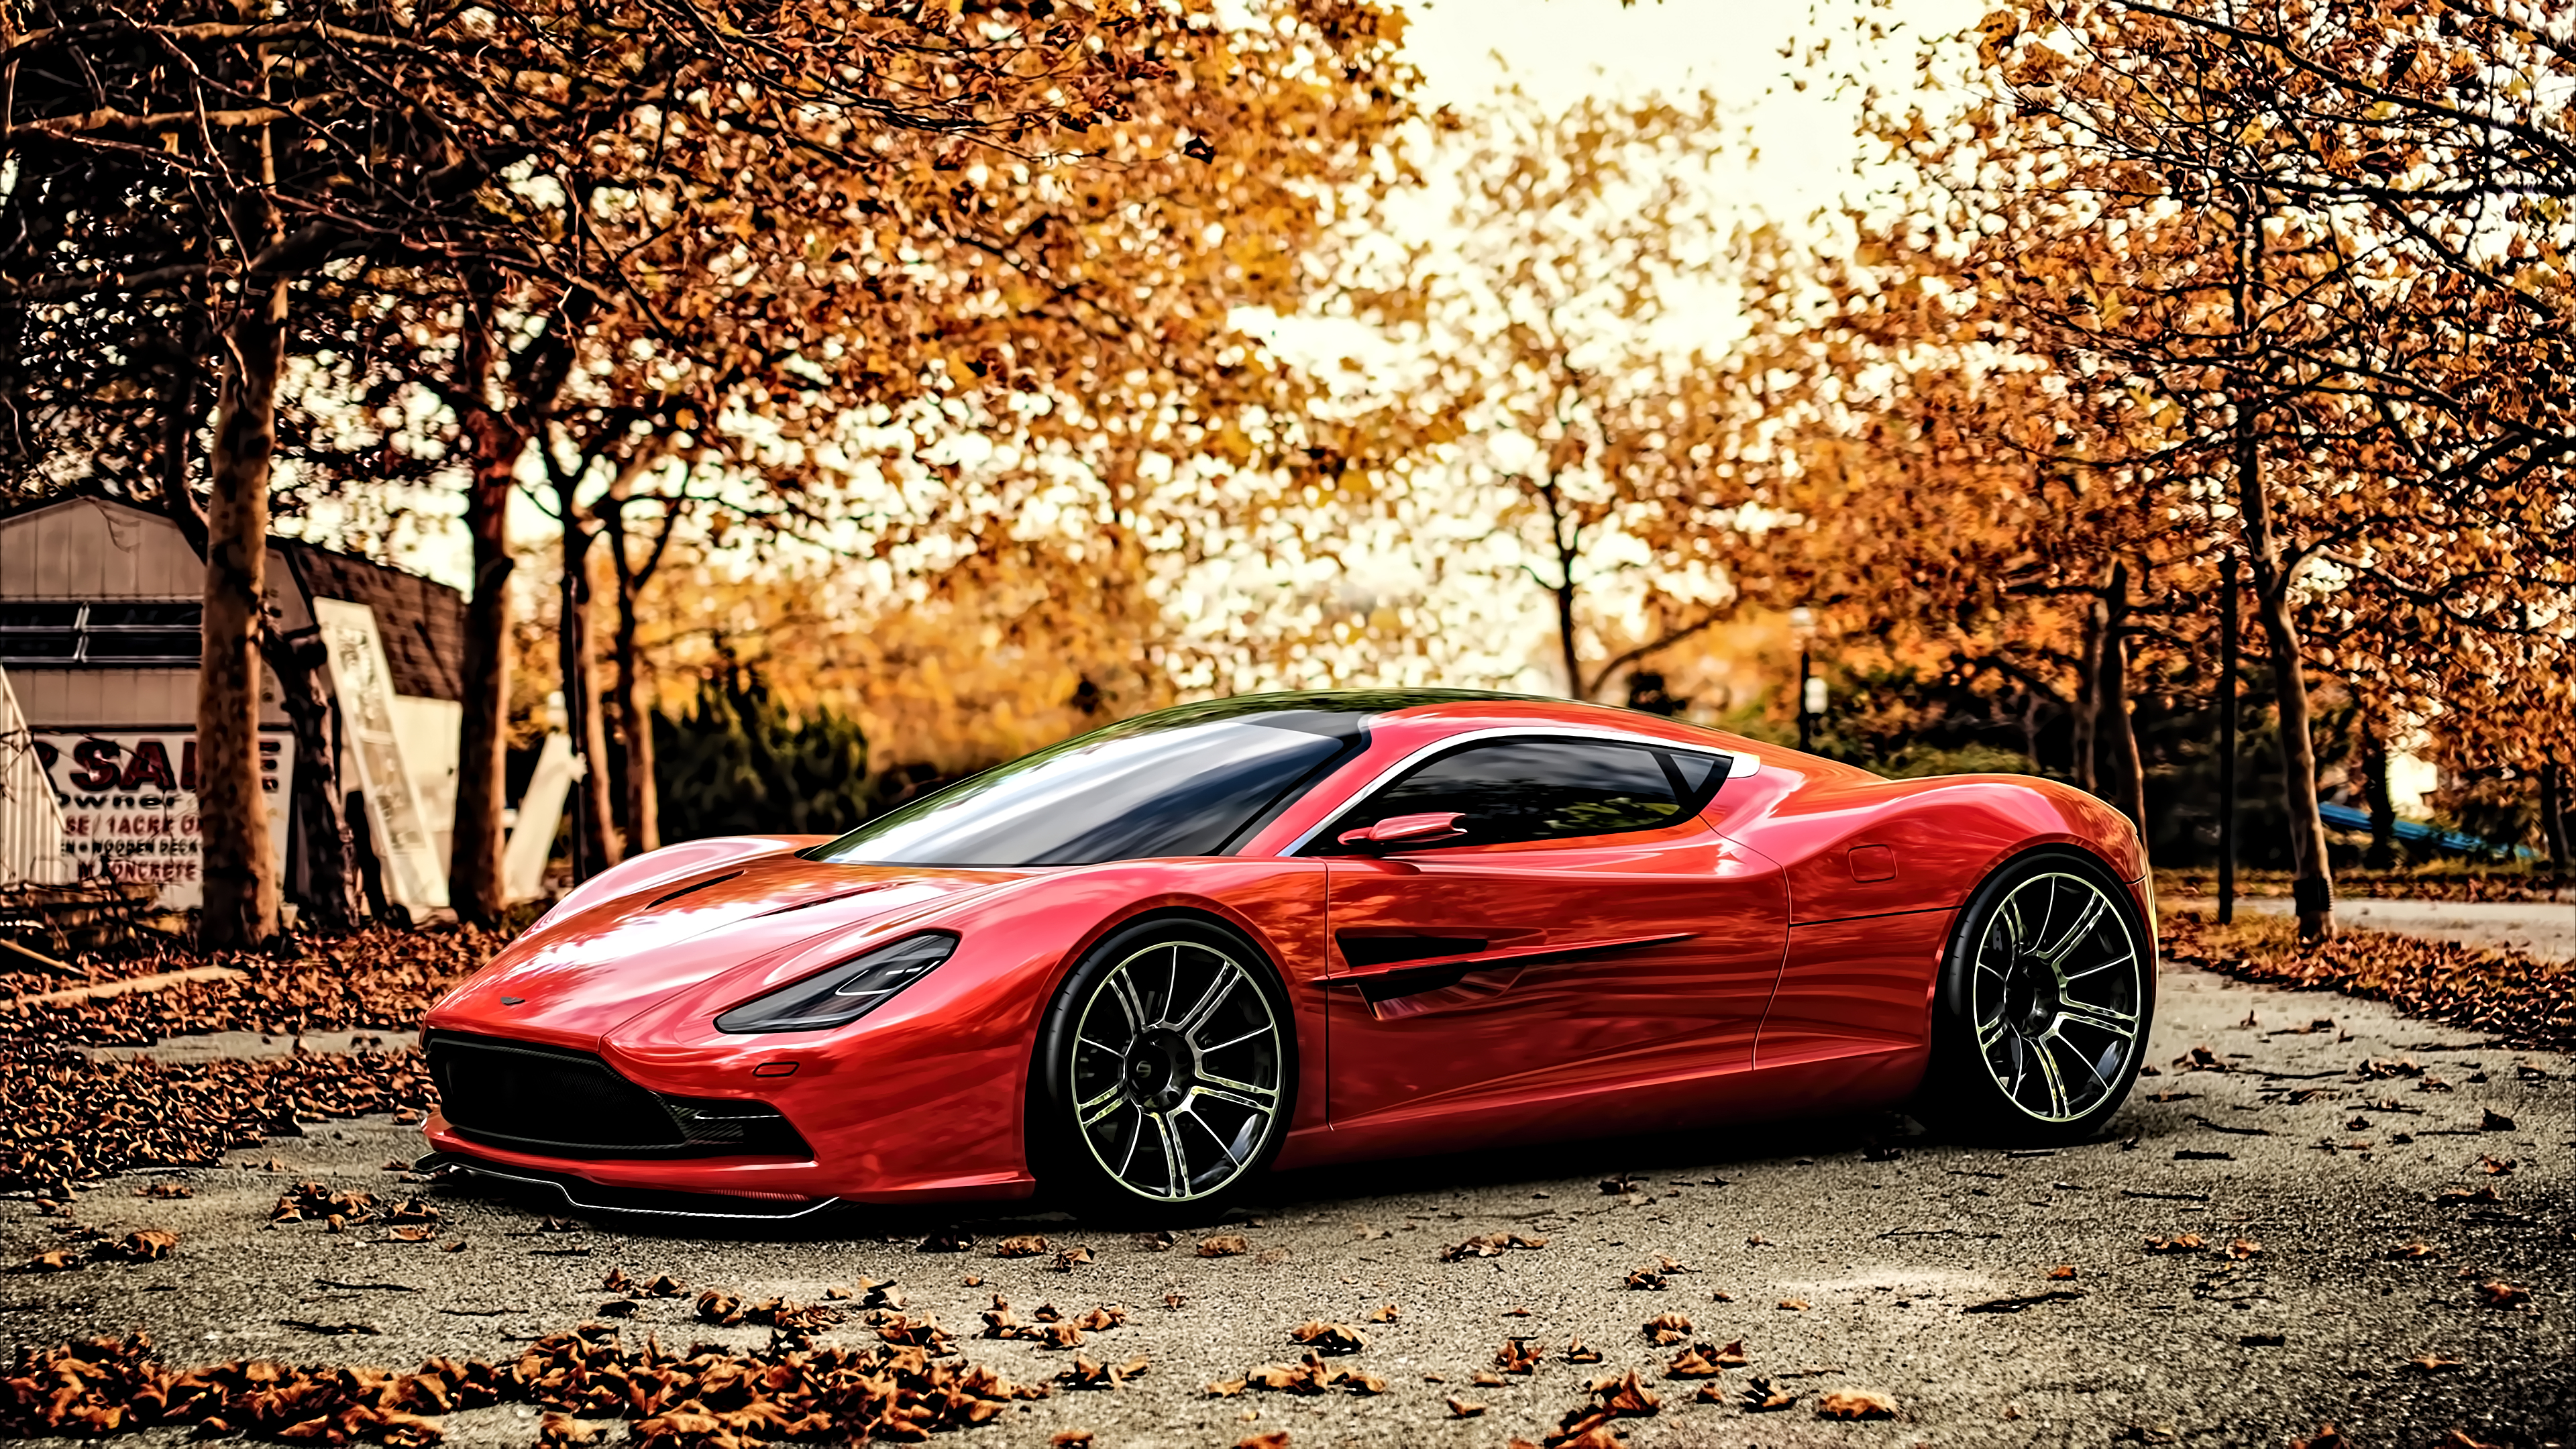 General 3840x2160 vehicle car sports car supercars sunset Aston Martin Aston Martin DBC concept cars red cars leaves urban trees frontal view